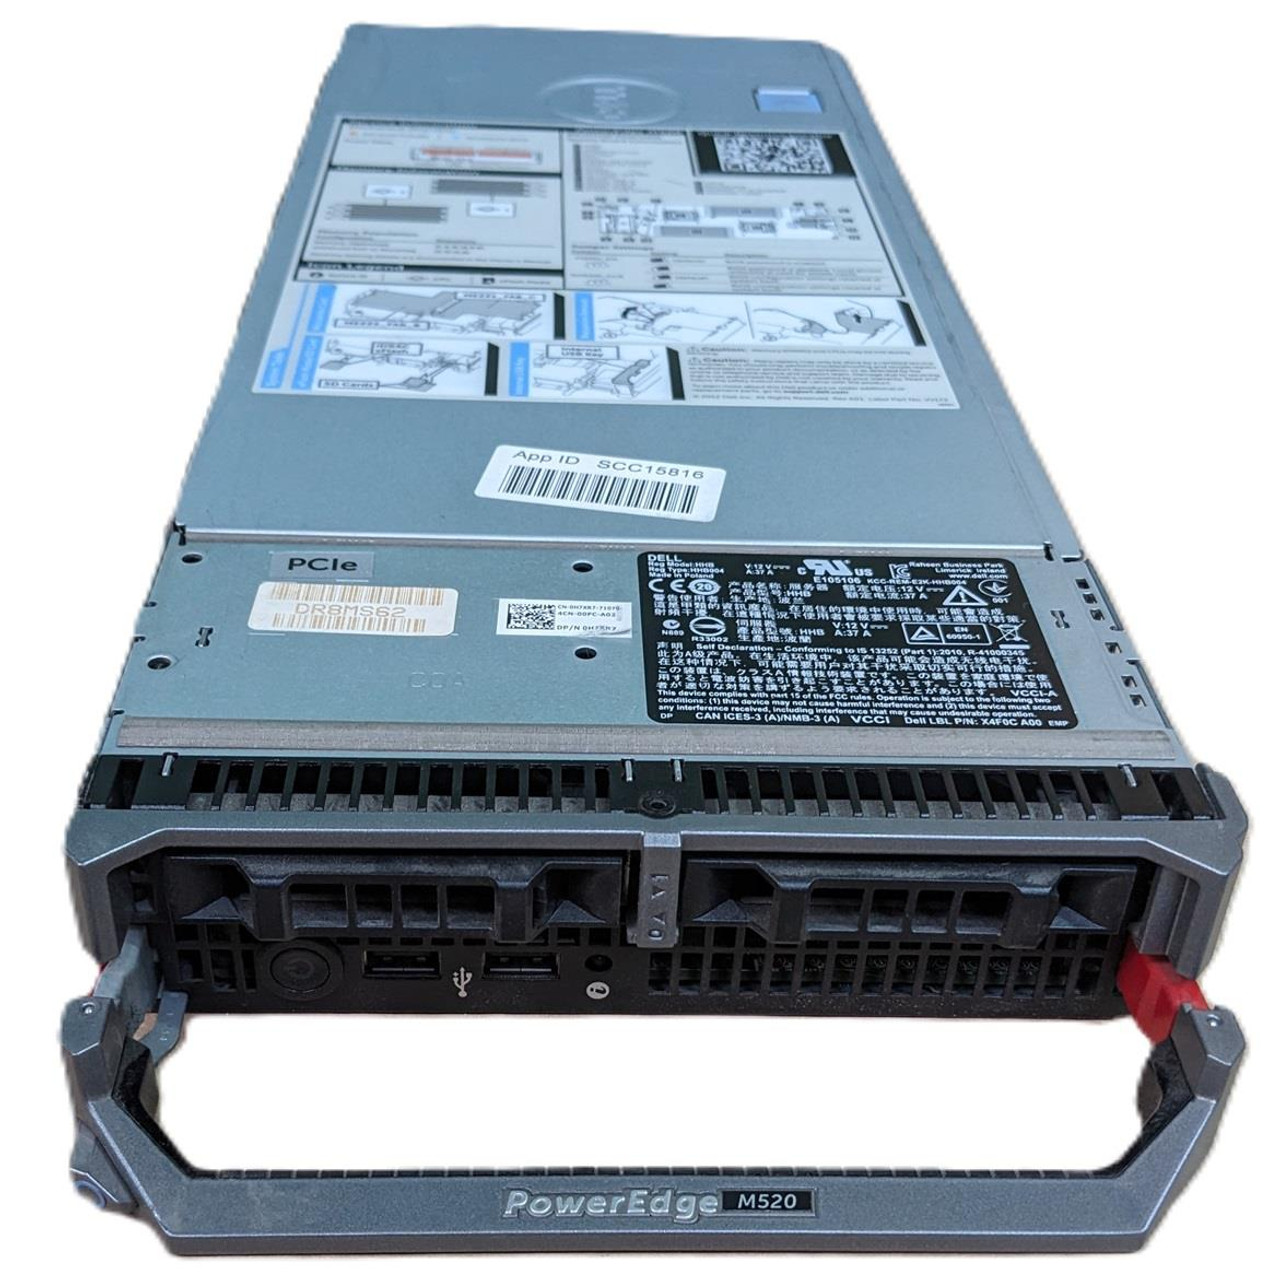 Power Up Data Center with Dell PowerEdge M620 Blade Server